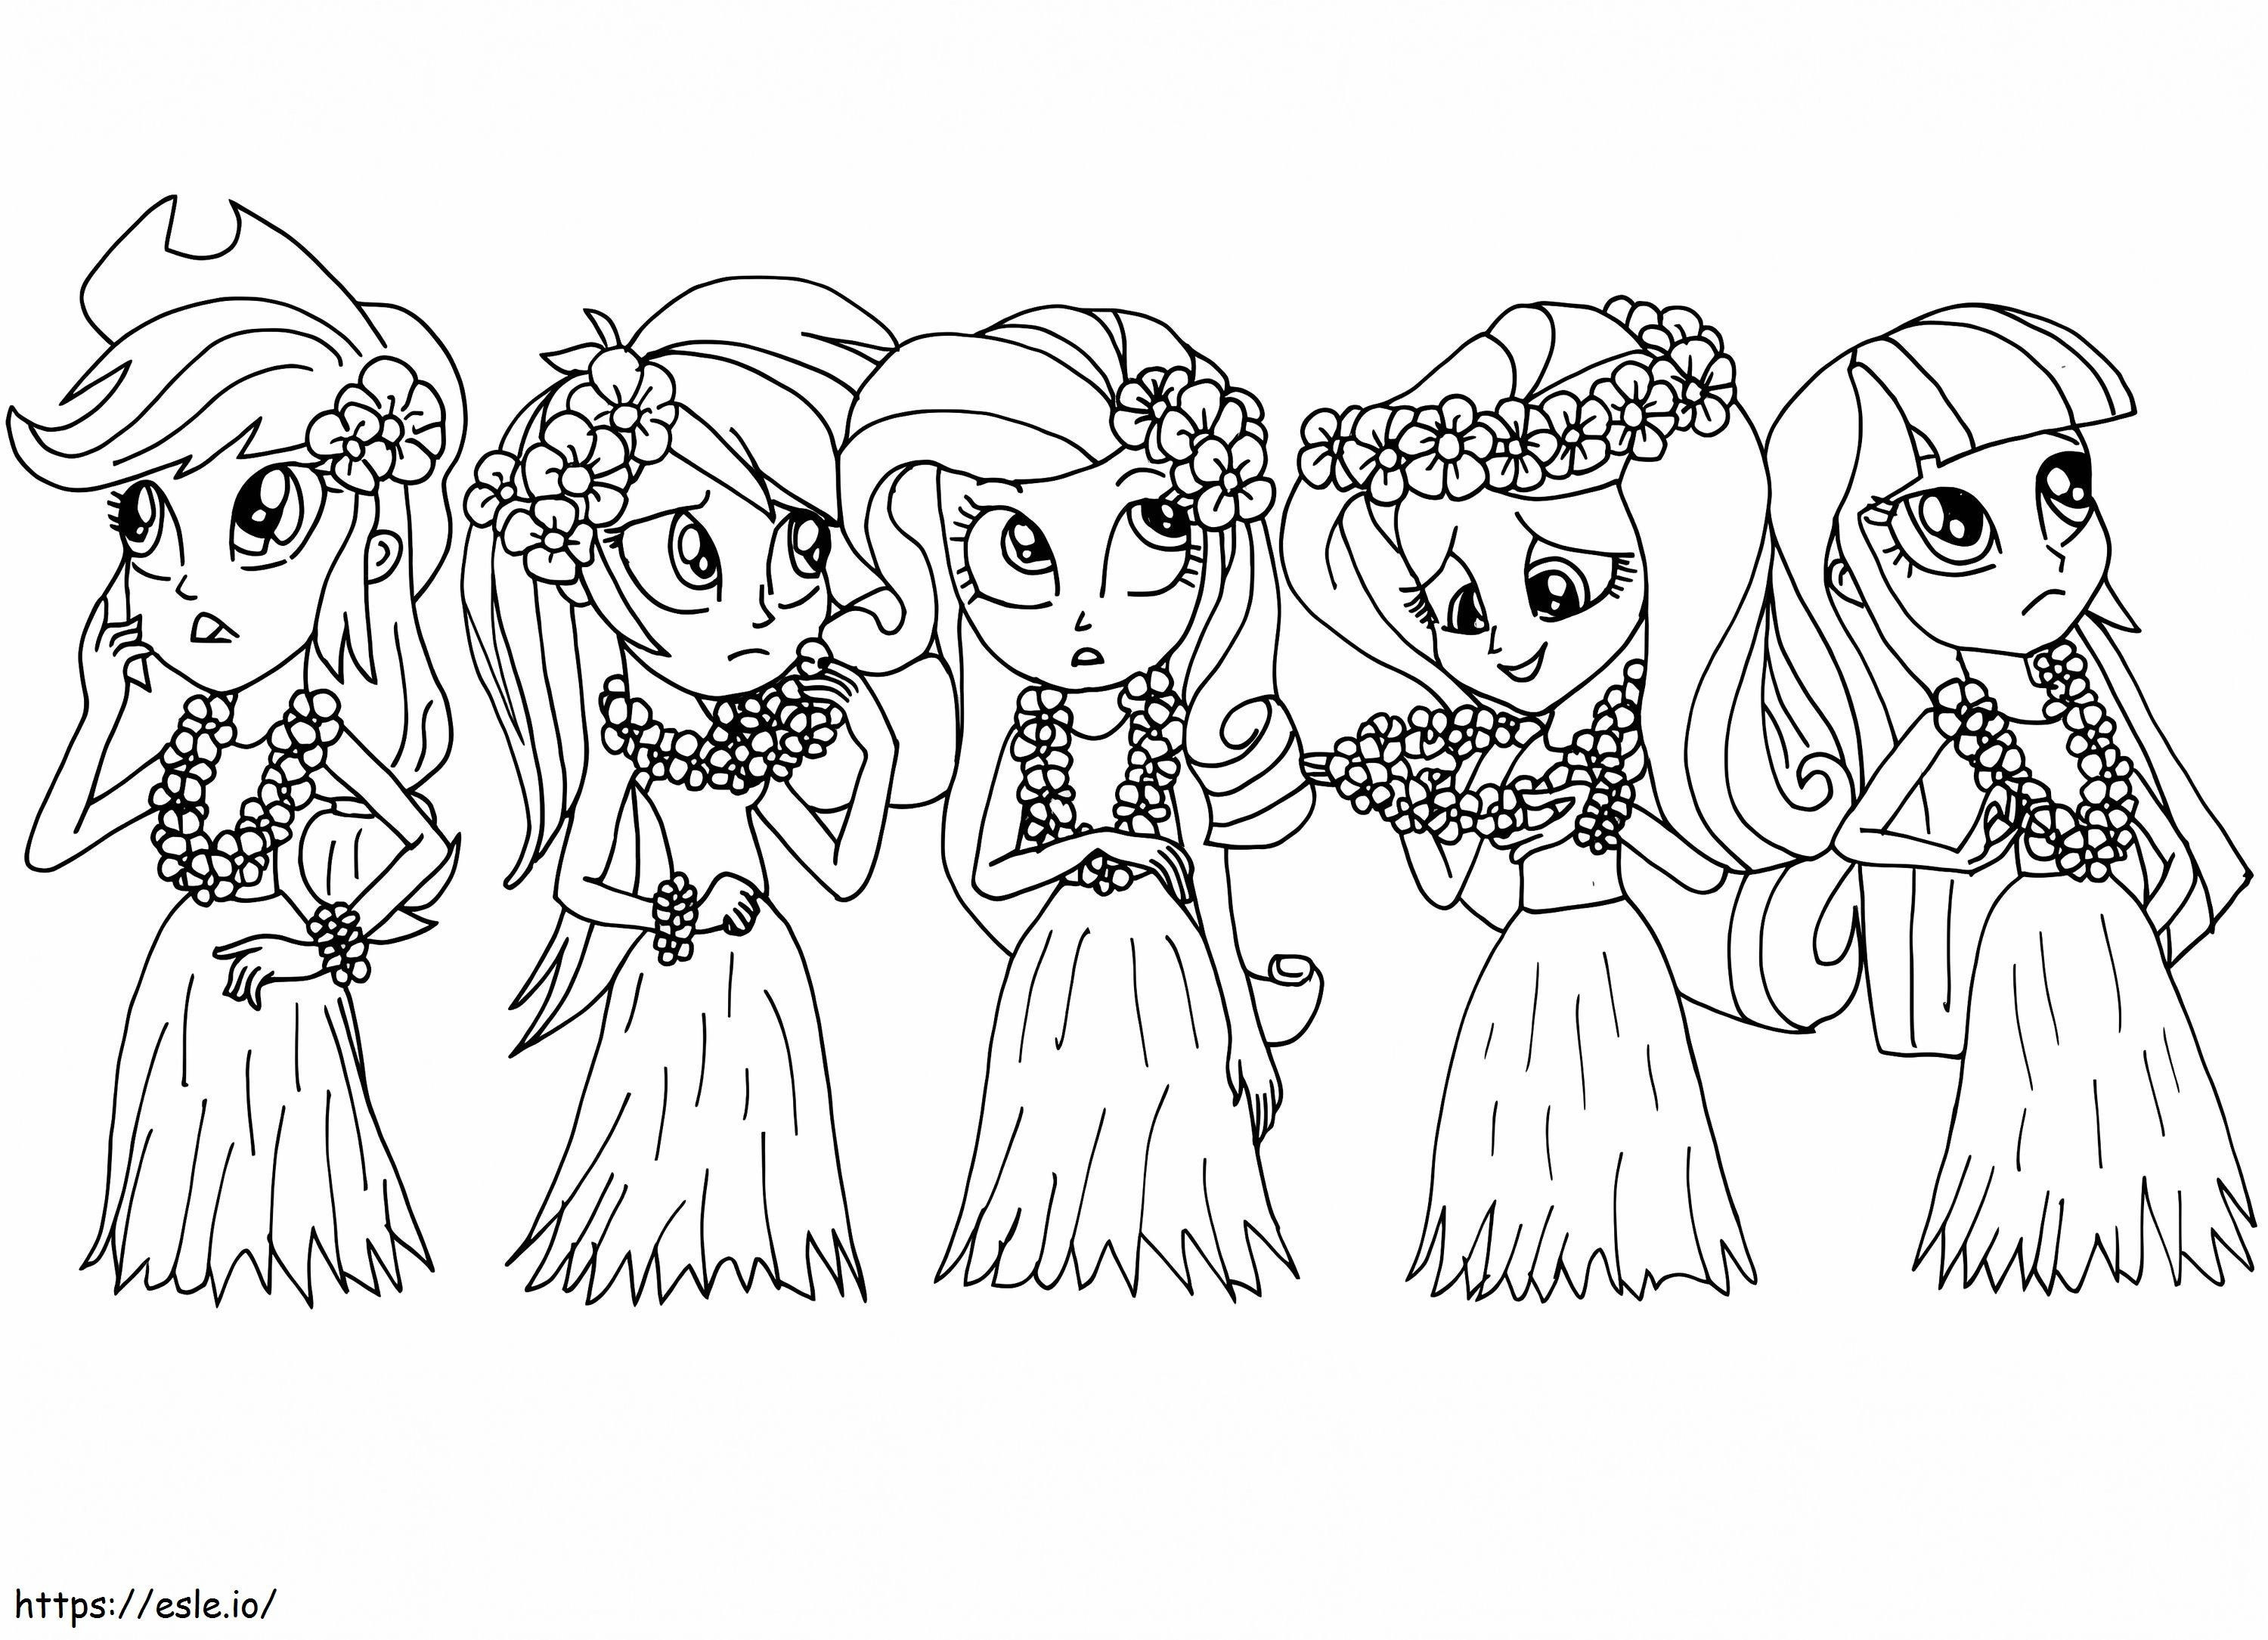 Equestria Girls 18 coloring page